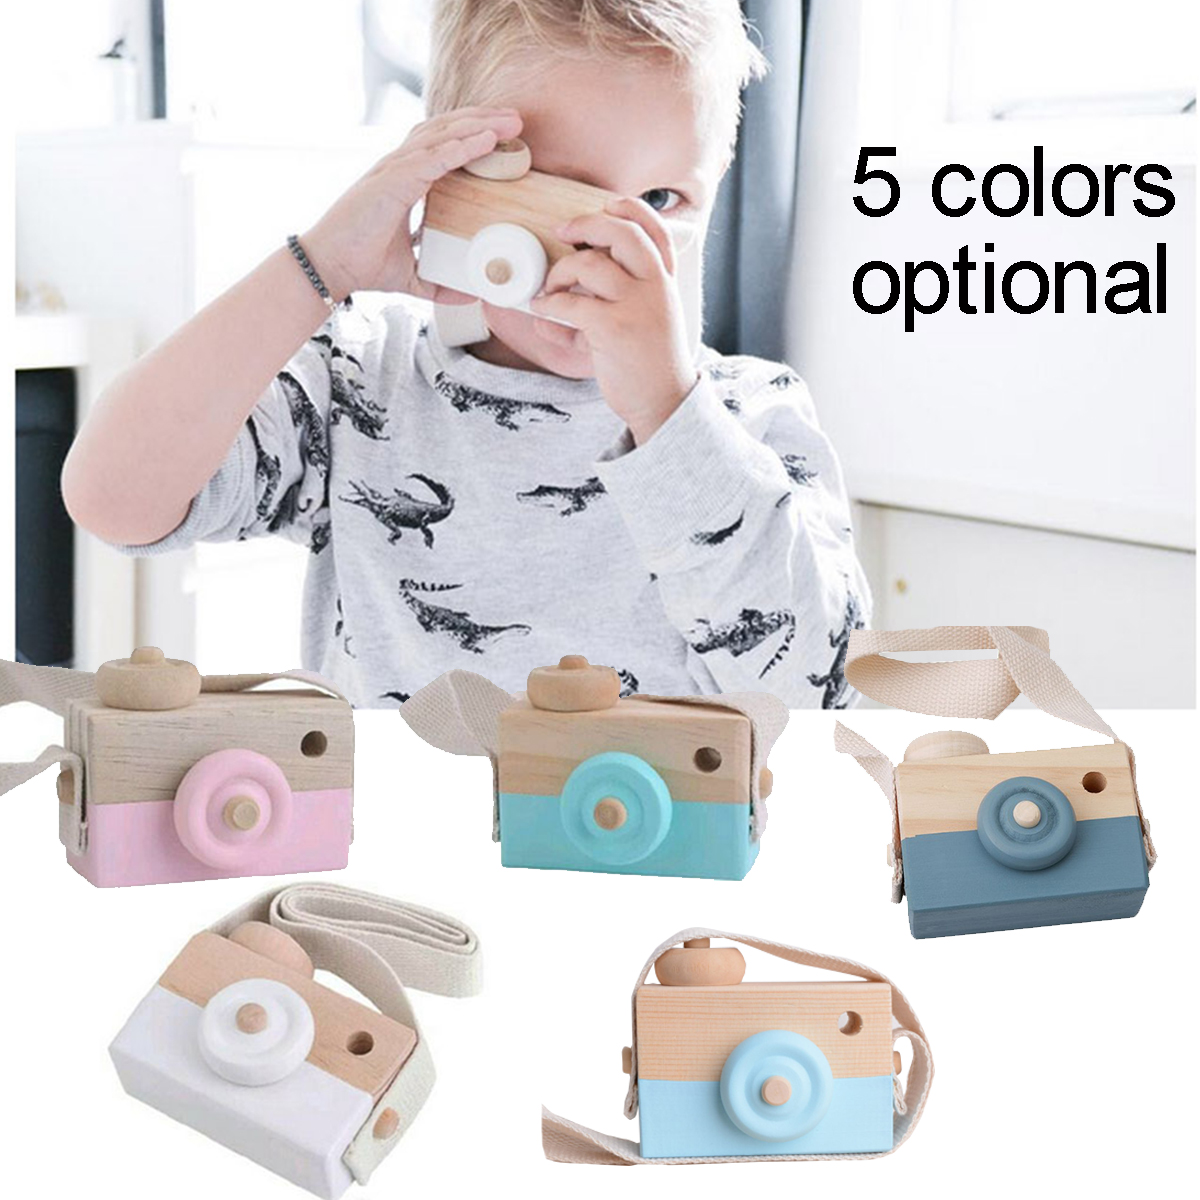 Wearable-Childrens-Wooden-Camera-Ornaments-Mini-Portable-Educational-Toys-Photography-Cute-Props-1573498-1